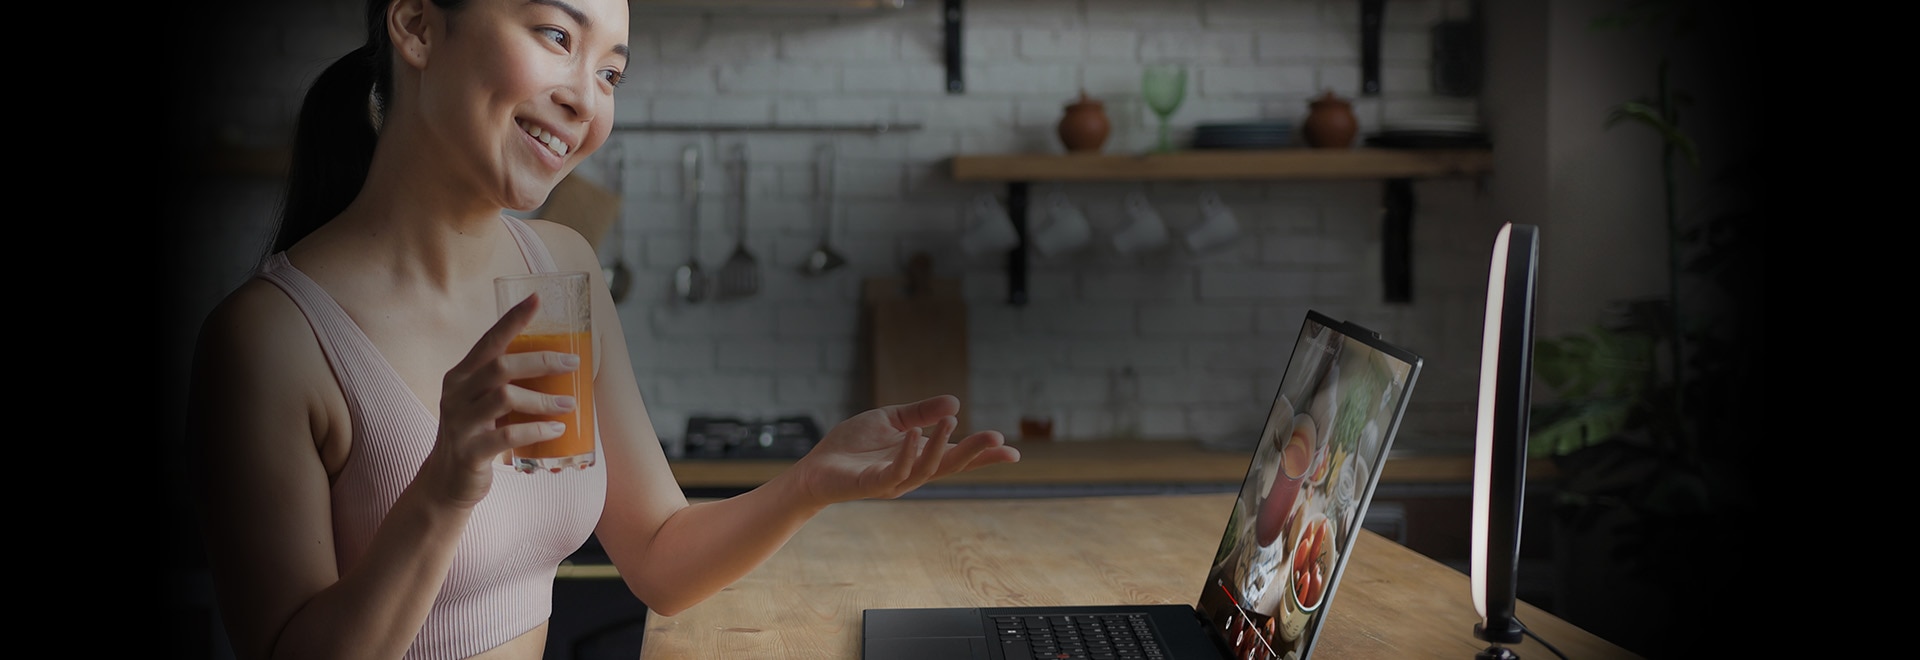 Woman sitting at a table holding a glass of juice in one hand and gesturing toward the Lenovo ThinkPad Z16 laptop in front of her. 